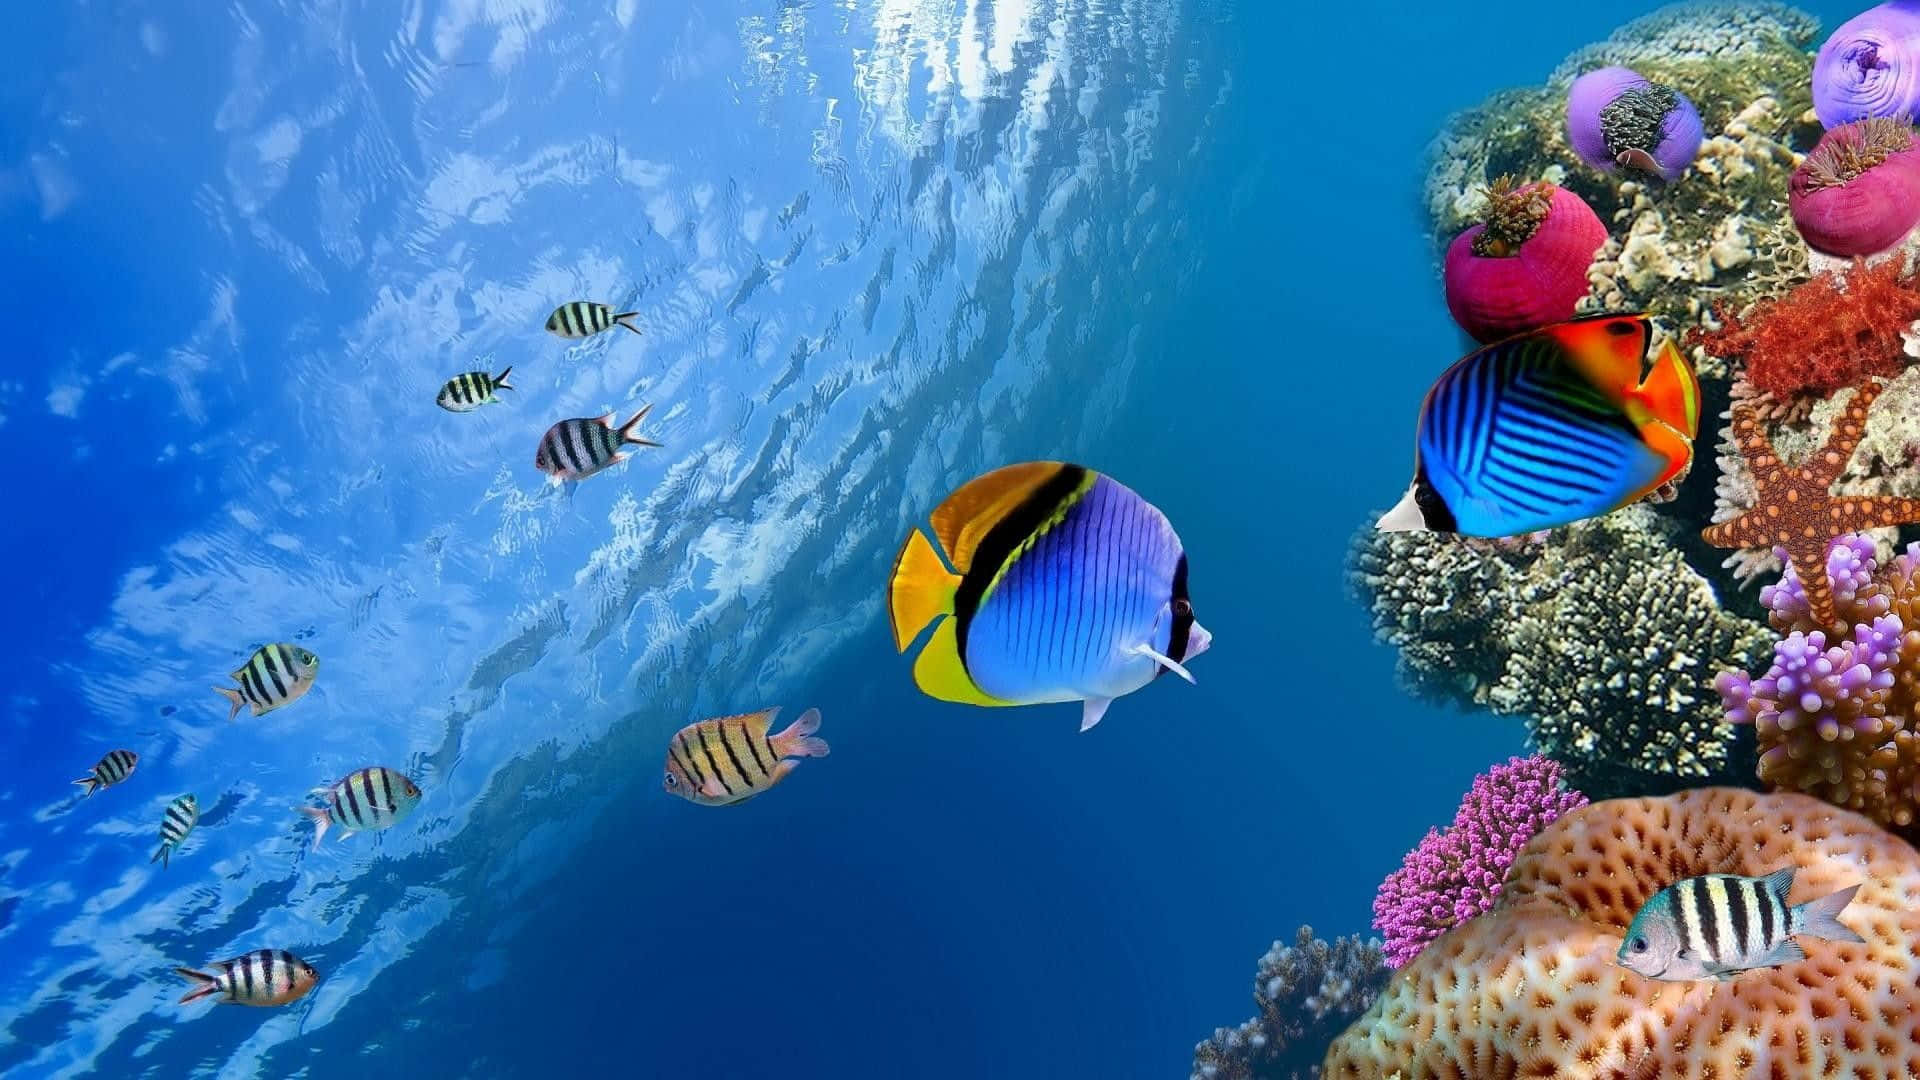 A colorful tropical fish swimming in clear blue ocean waters